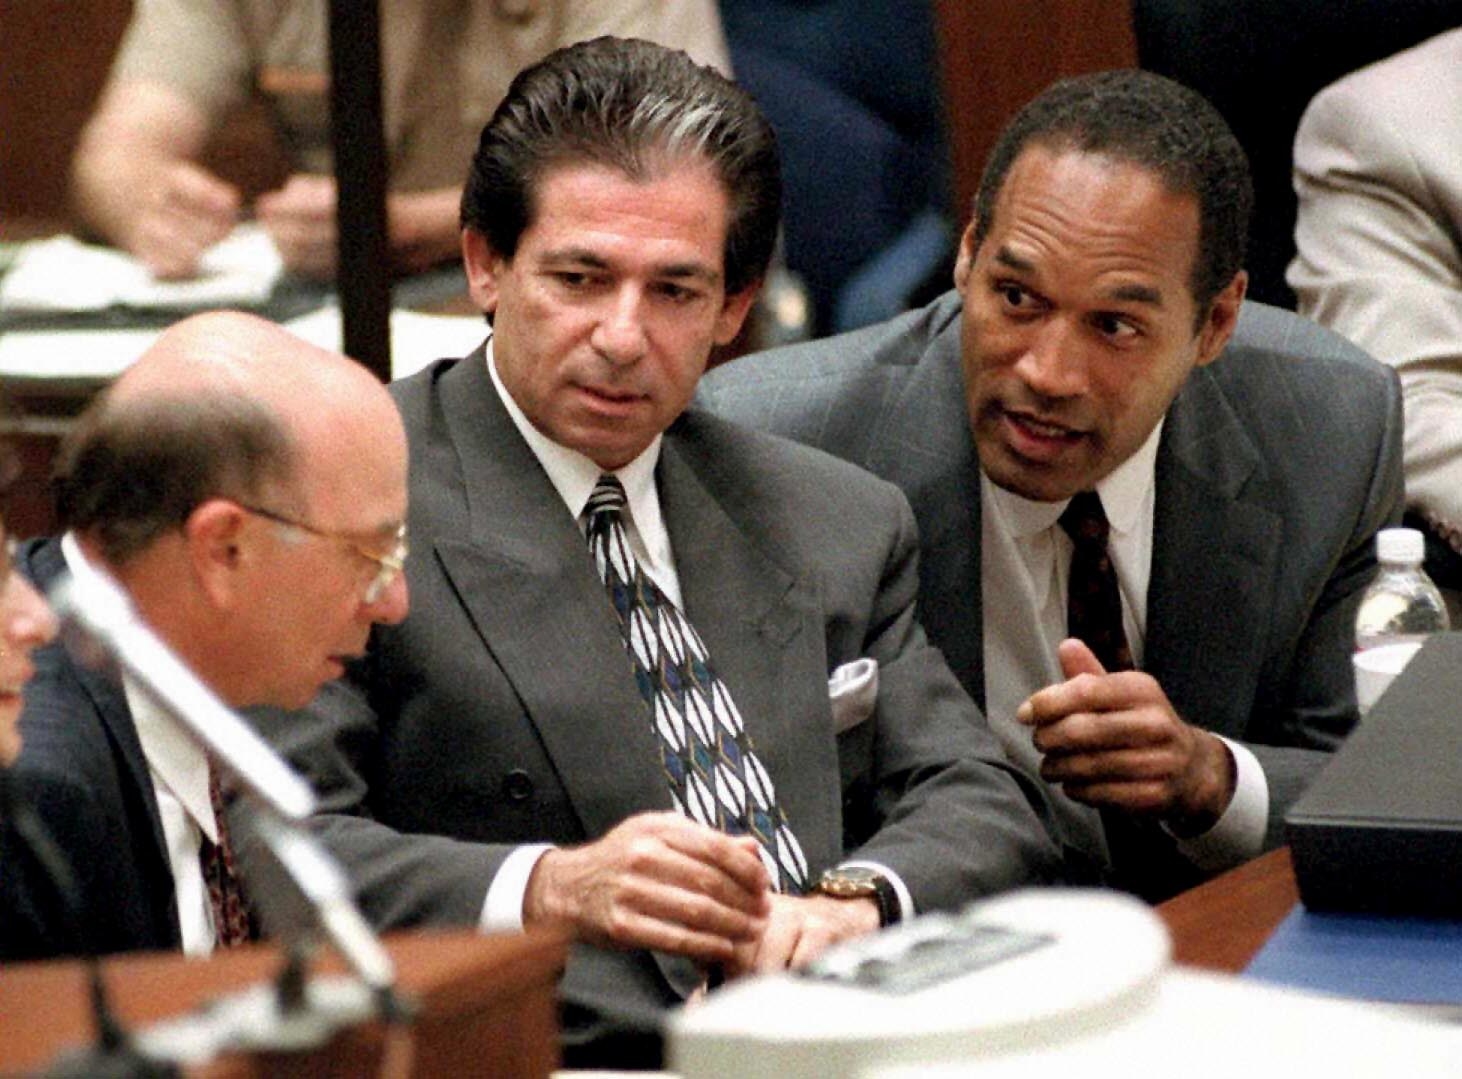 Robert Kardashian and O.J. Simpson in a courtroom